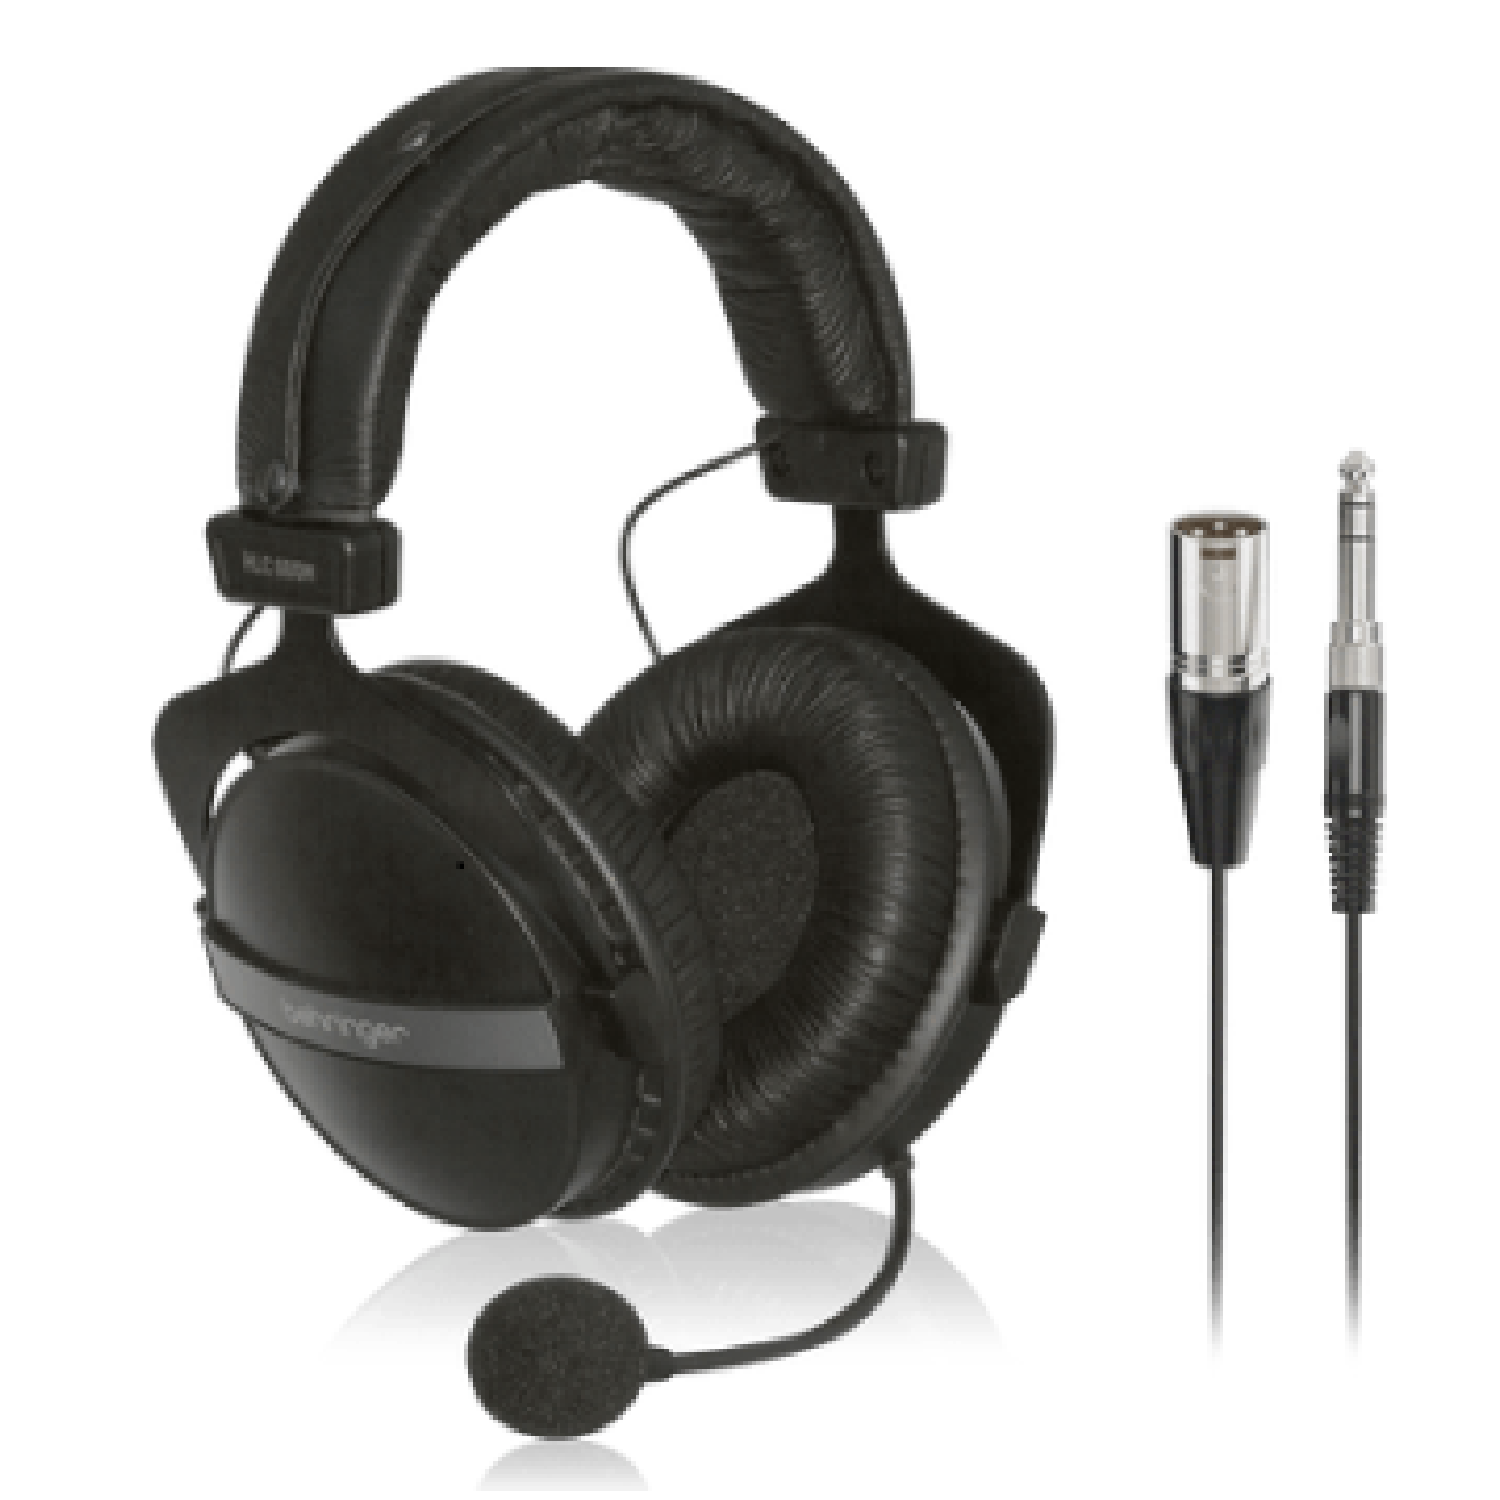 Multipurpose Headphones with Built-in Microphone   HLC660M behringer